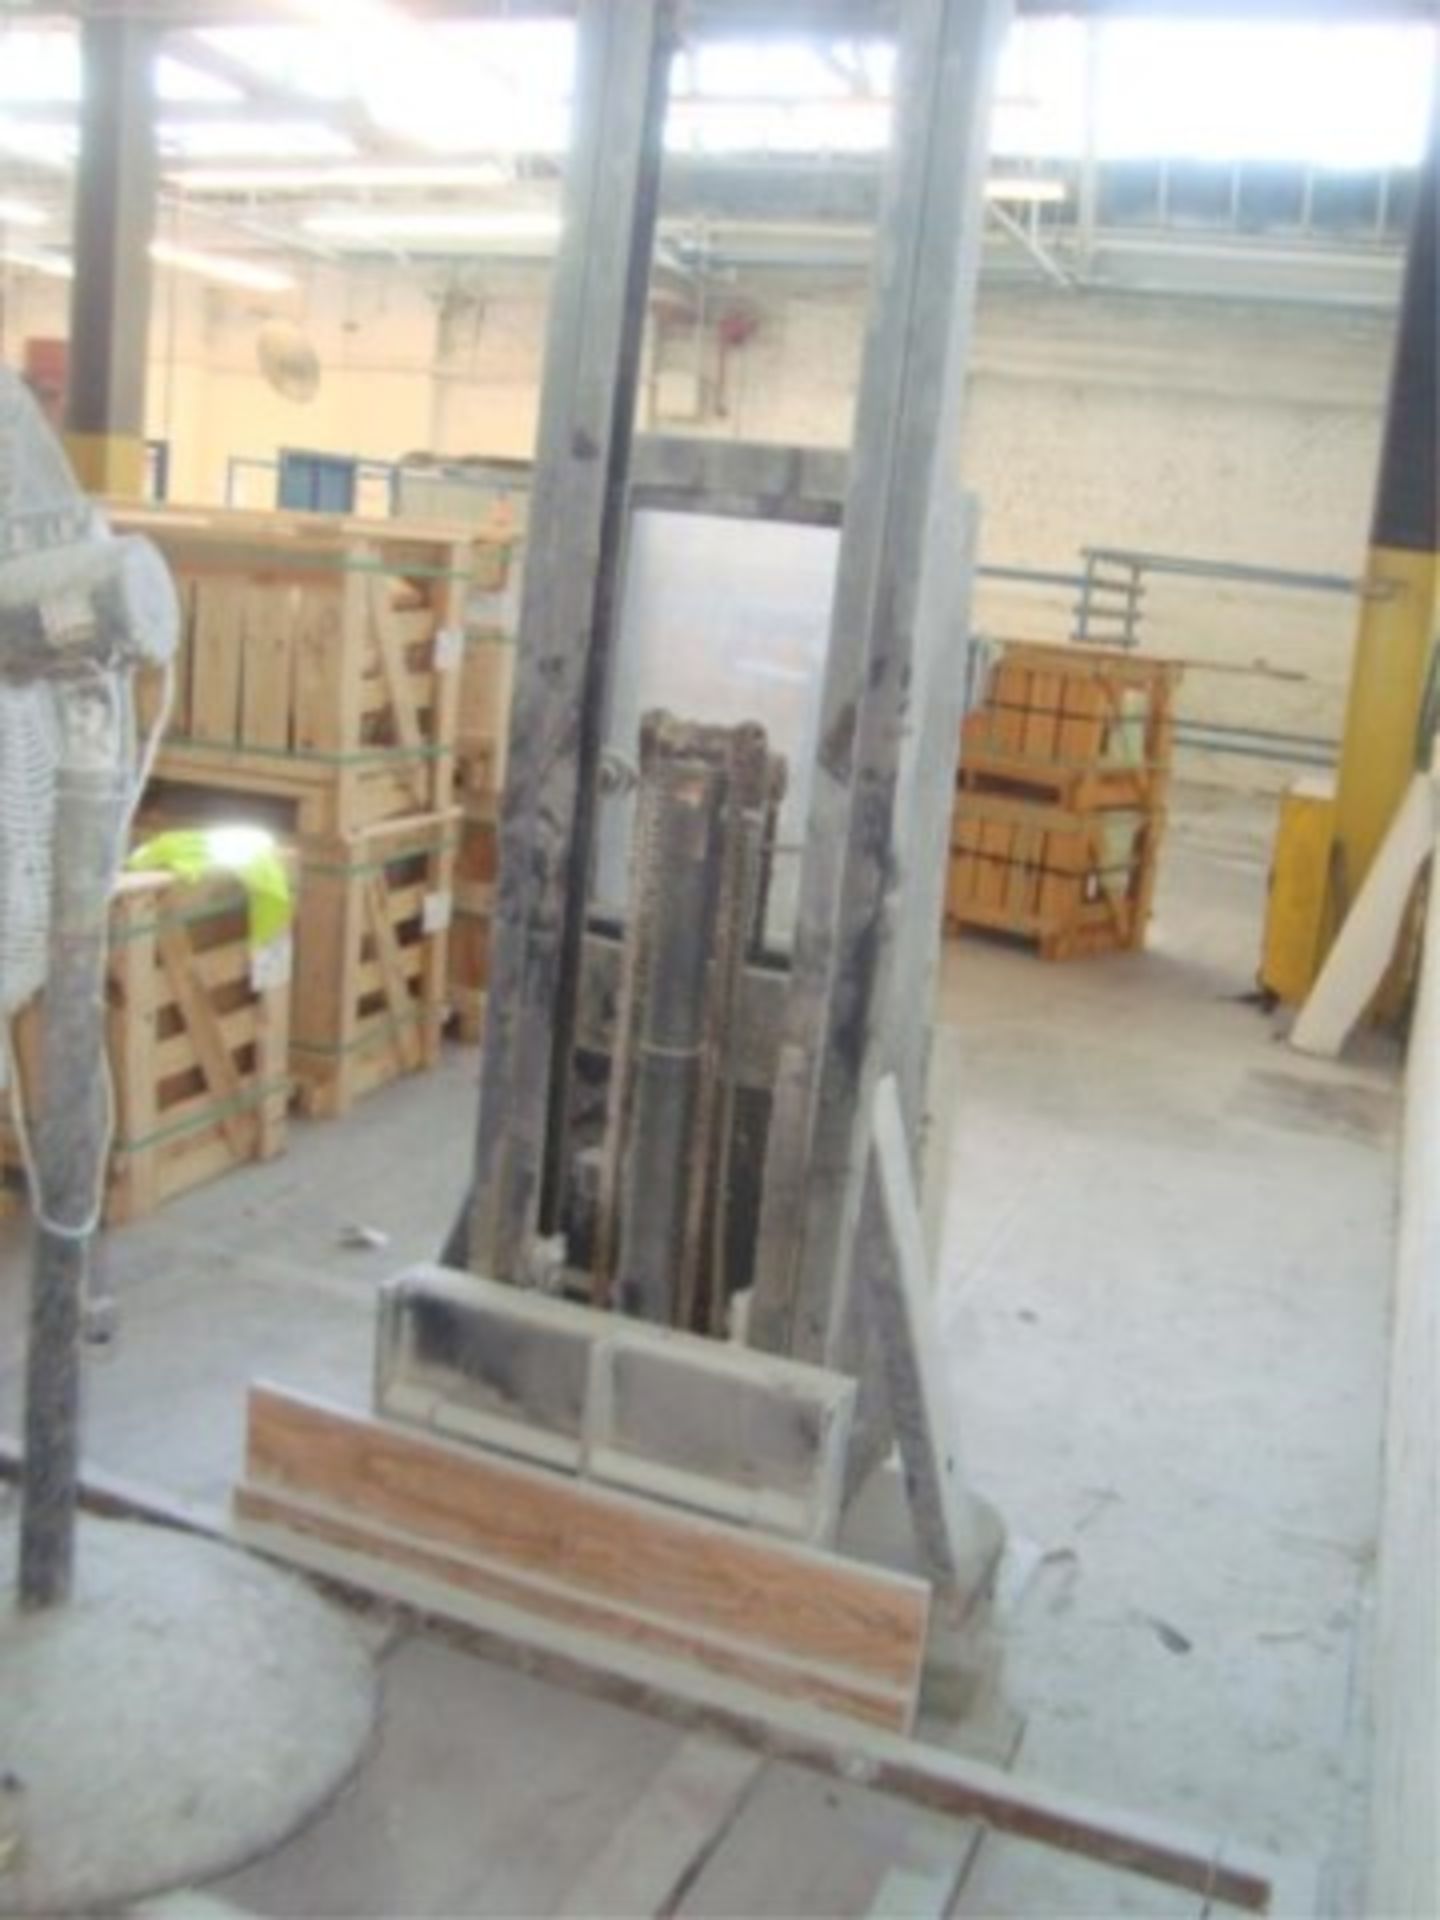 2000 lb Capacity Electric Walkie Stacker Lift - Image 3 of 4